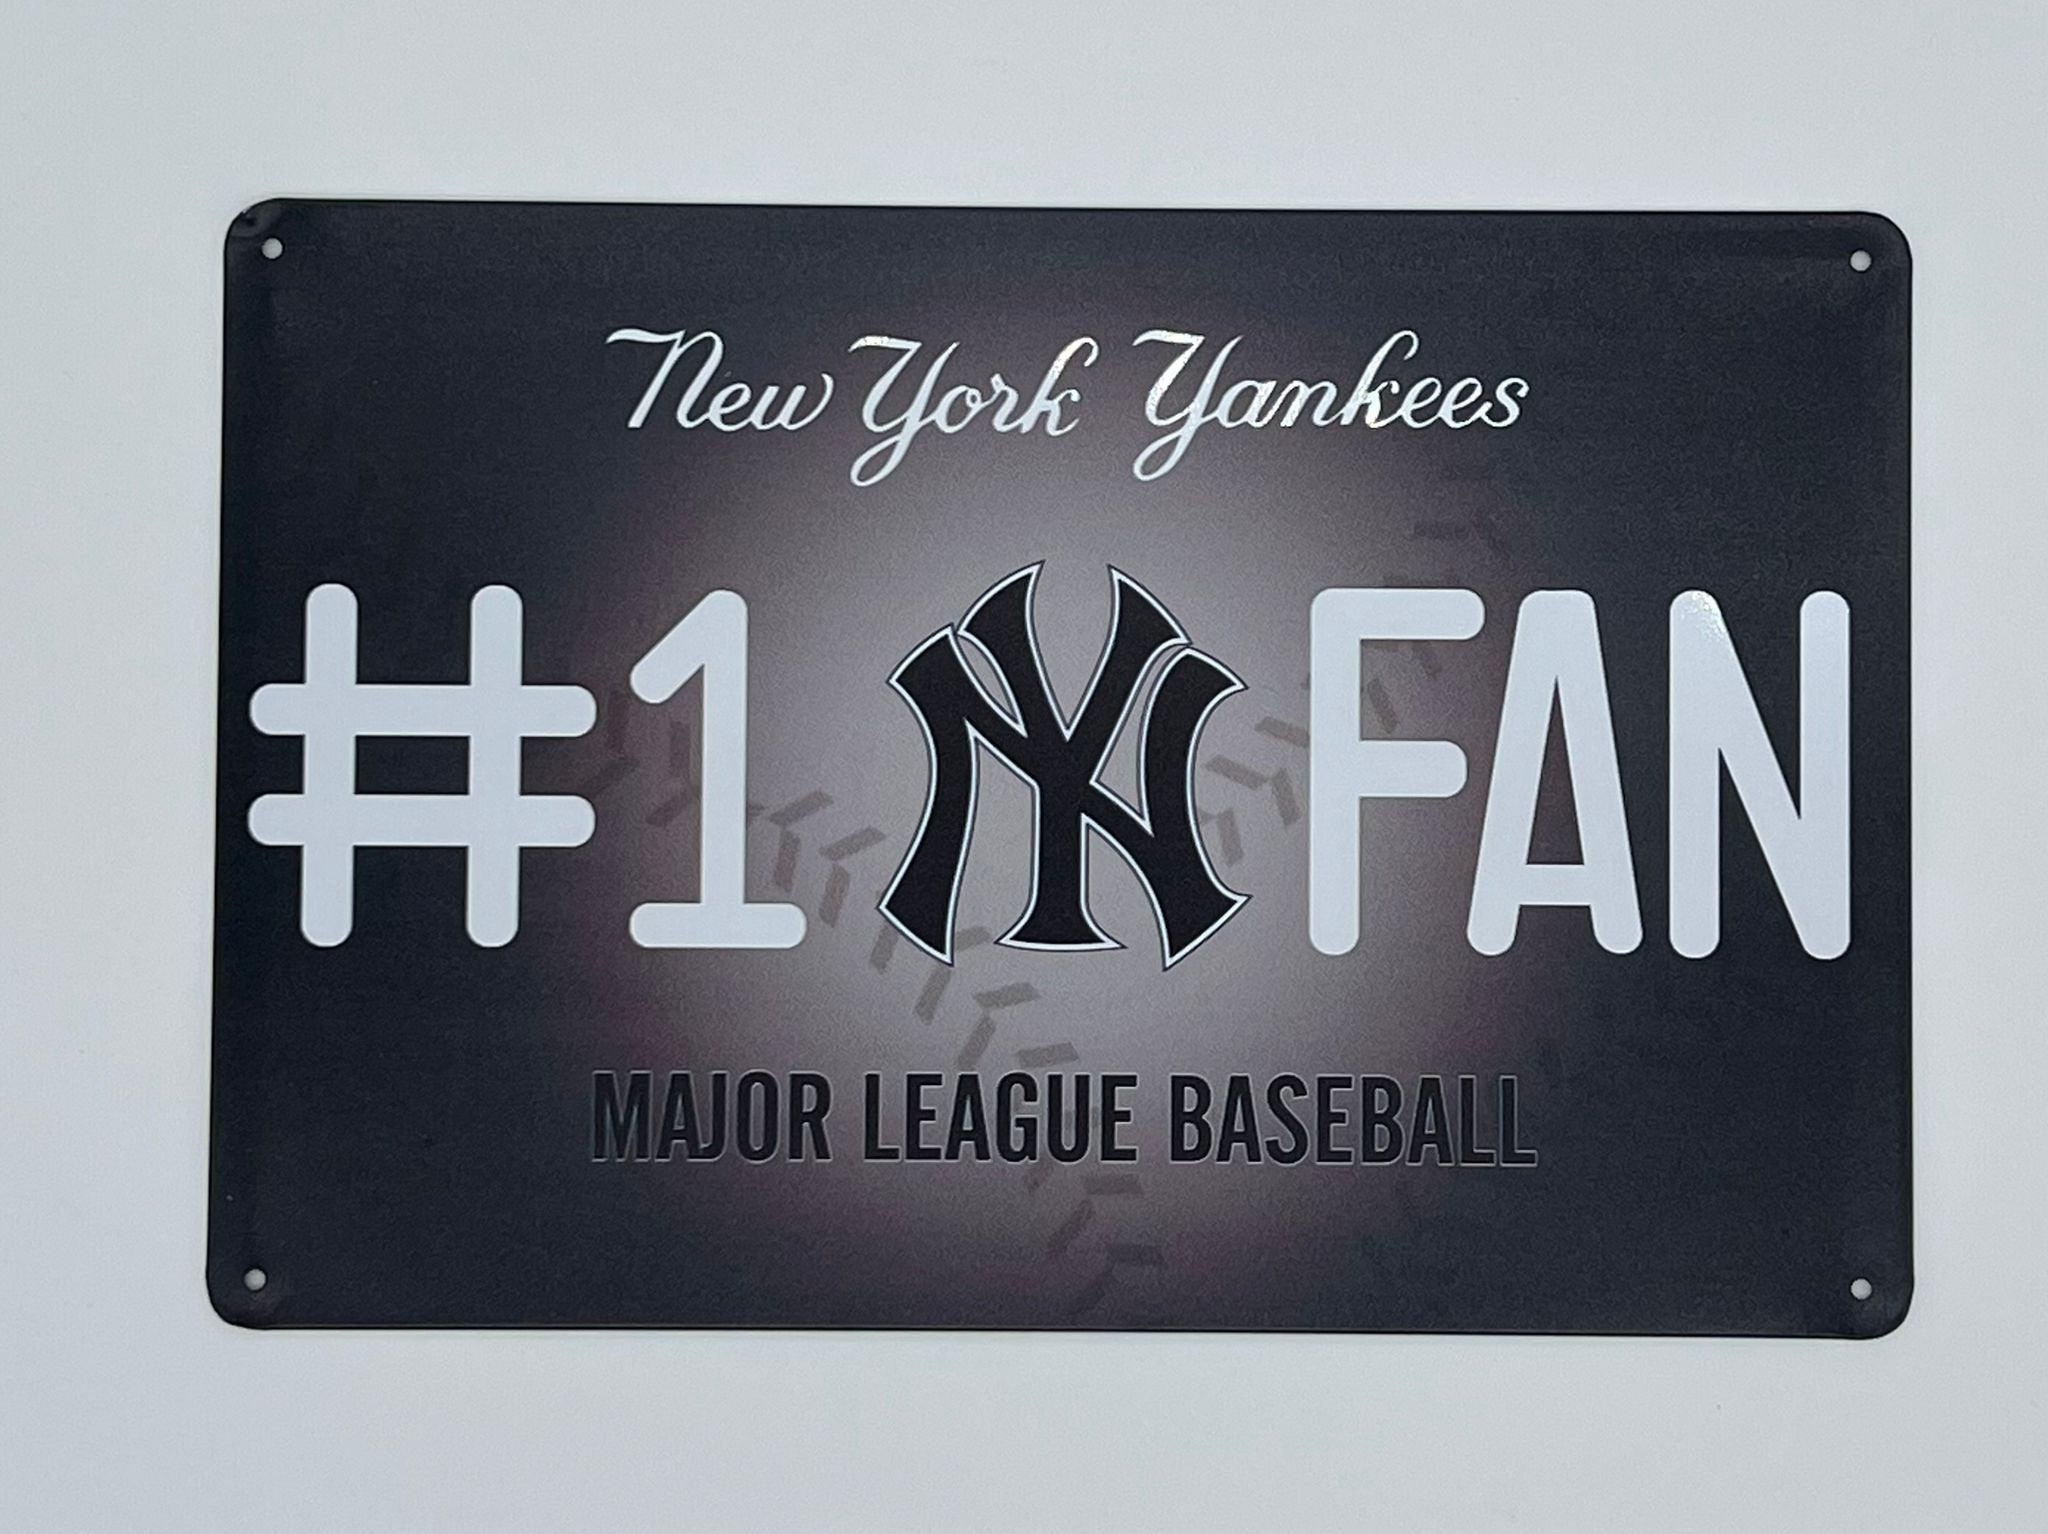 New York Yankees NY Baseball USA metal plate license plate Vintage gift sports displays arts and crafts projects honkbal ball license plate